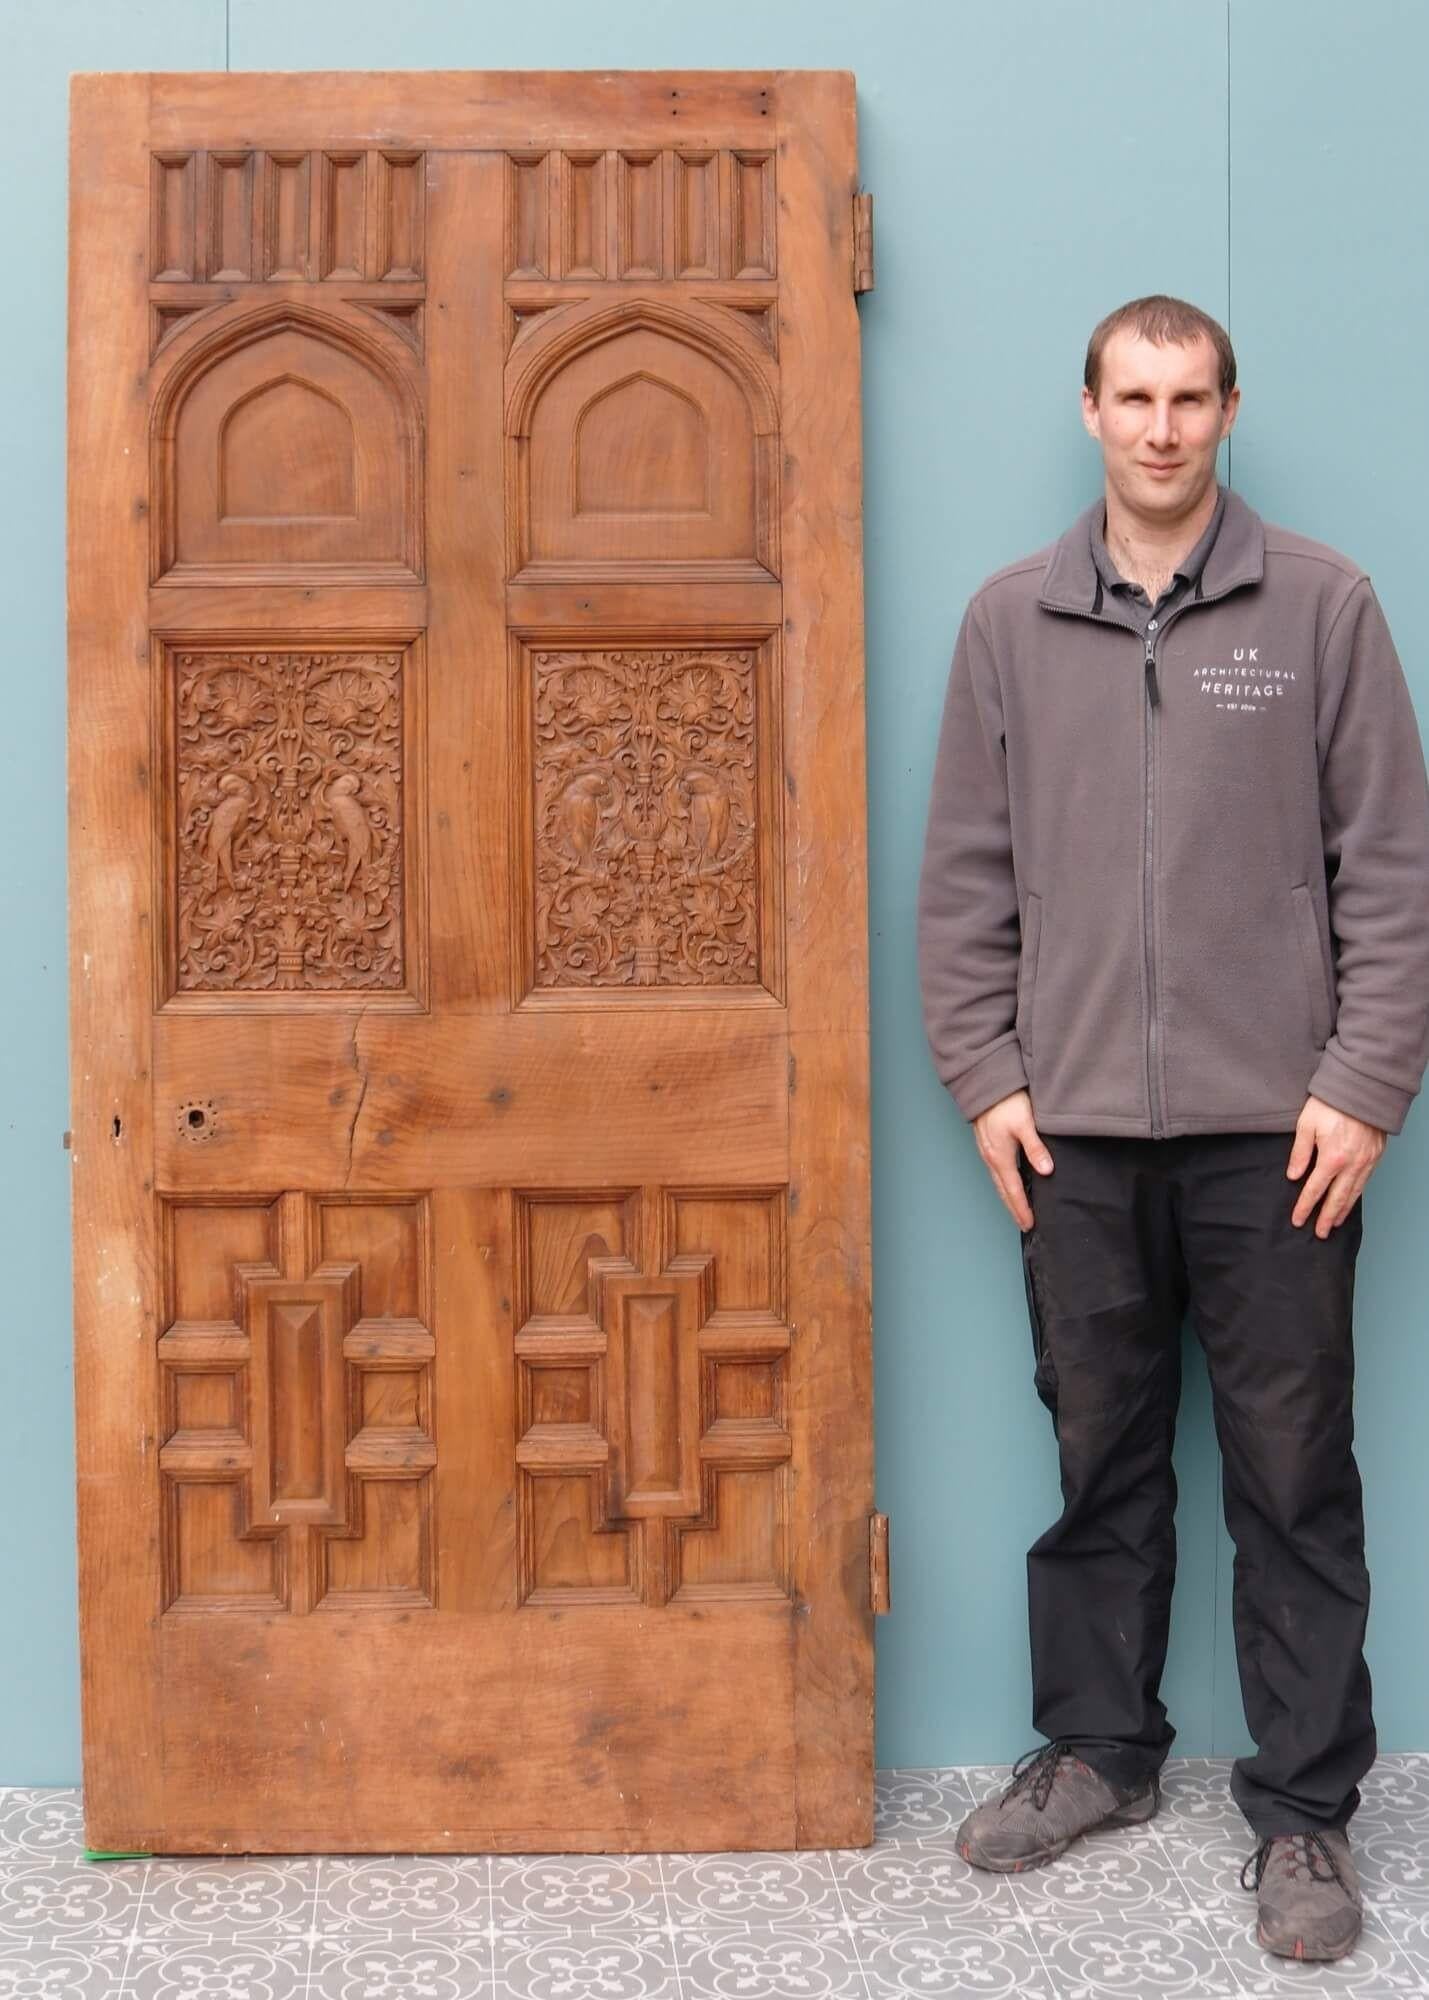 A unique carved oak door dating from the 1870s with an ornately crafted design to the front and simple, clean oak to the back. The carved side of the door is thought to pre-date the other by at least 100 years, making this a true architectural